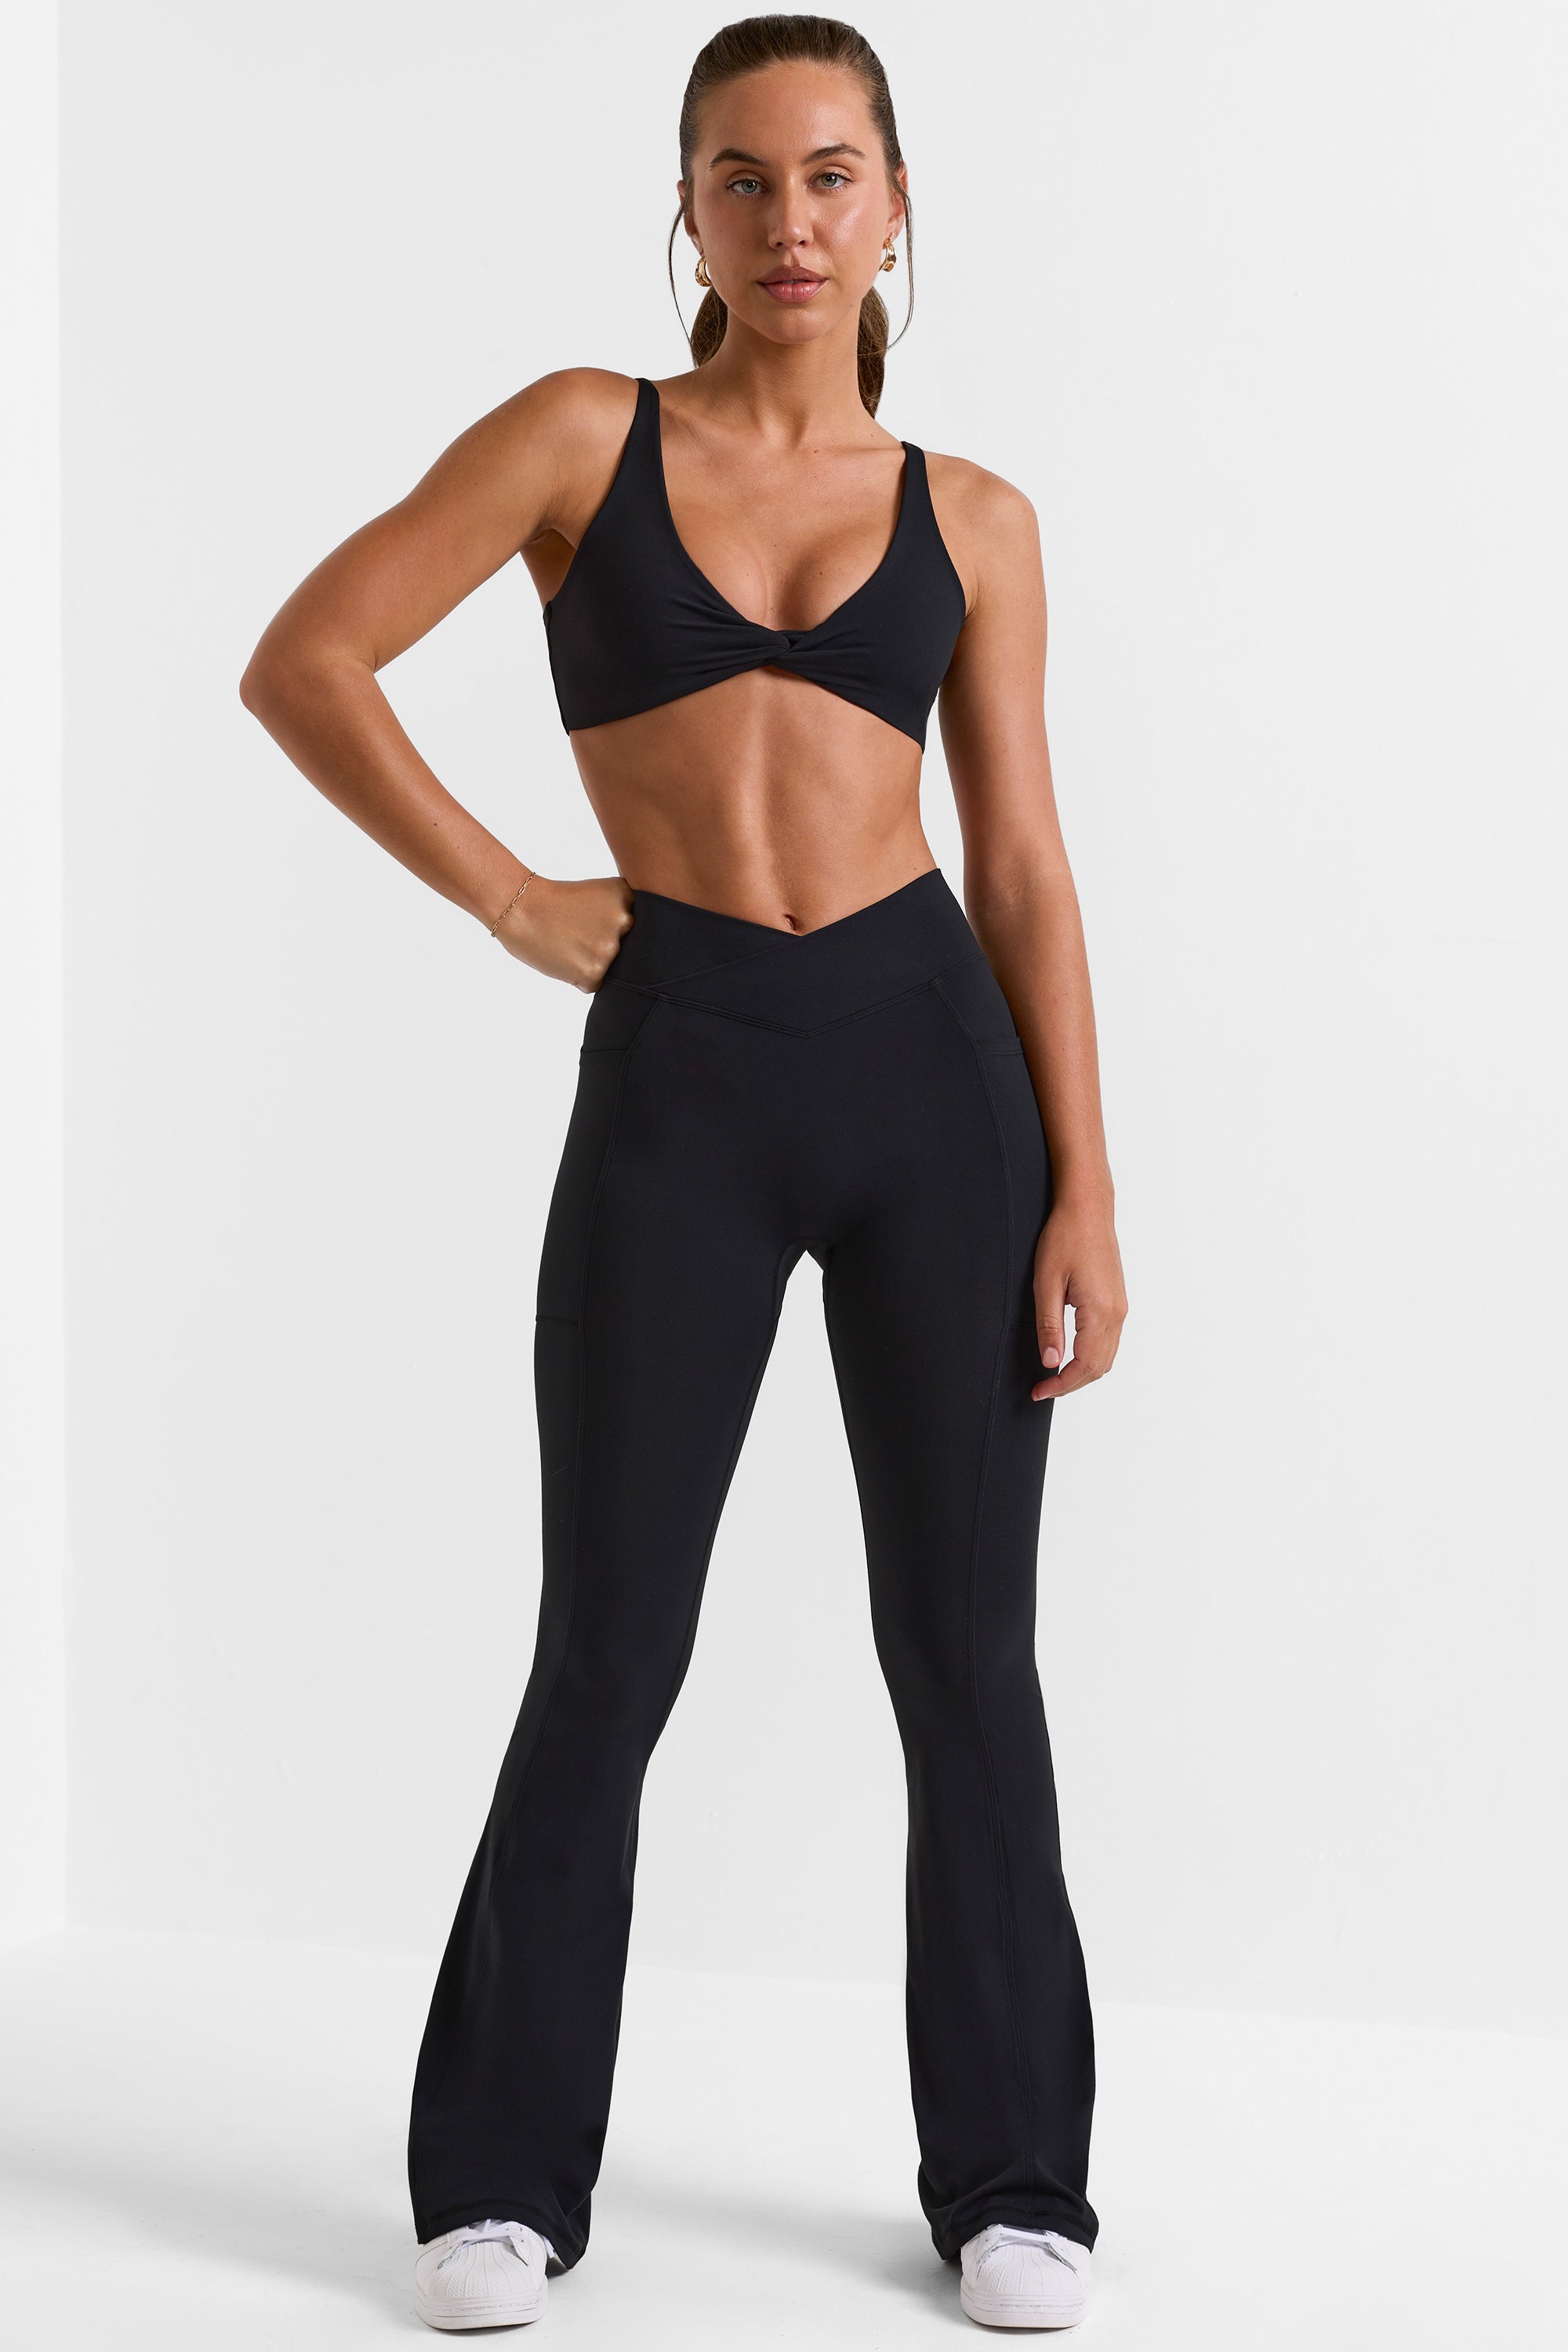 Go The Extra Mile Flare Leggings- Black – The Pulse Boutique